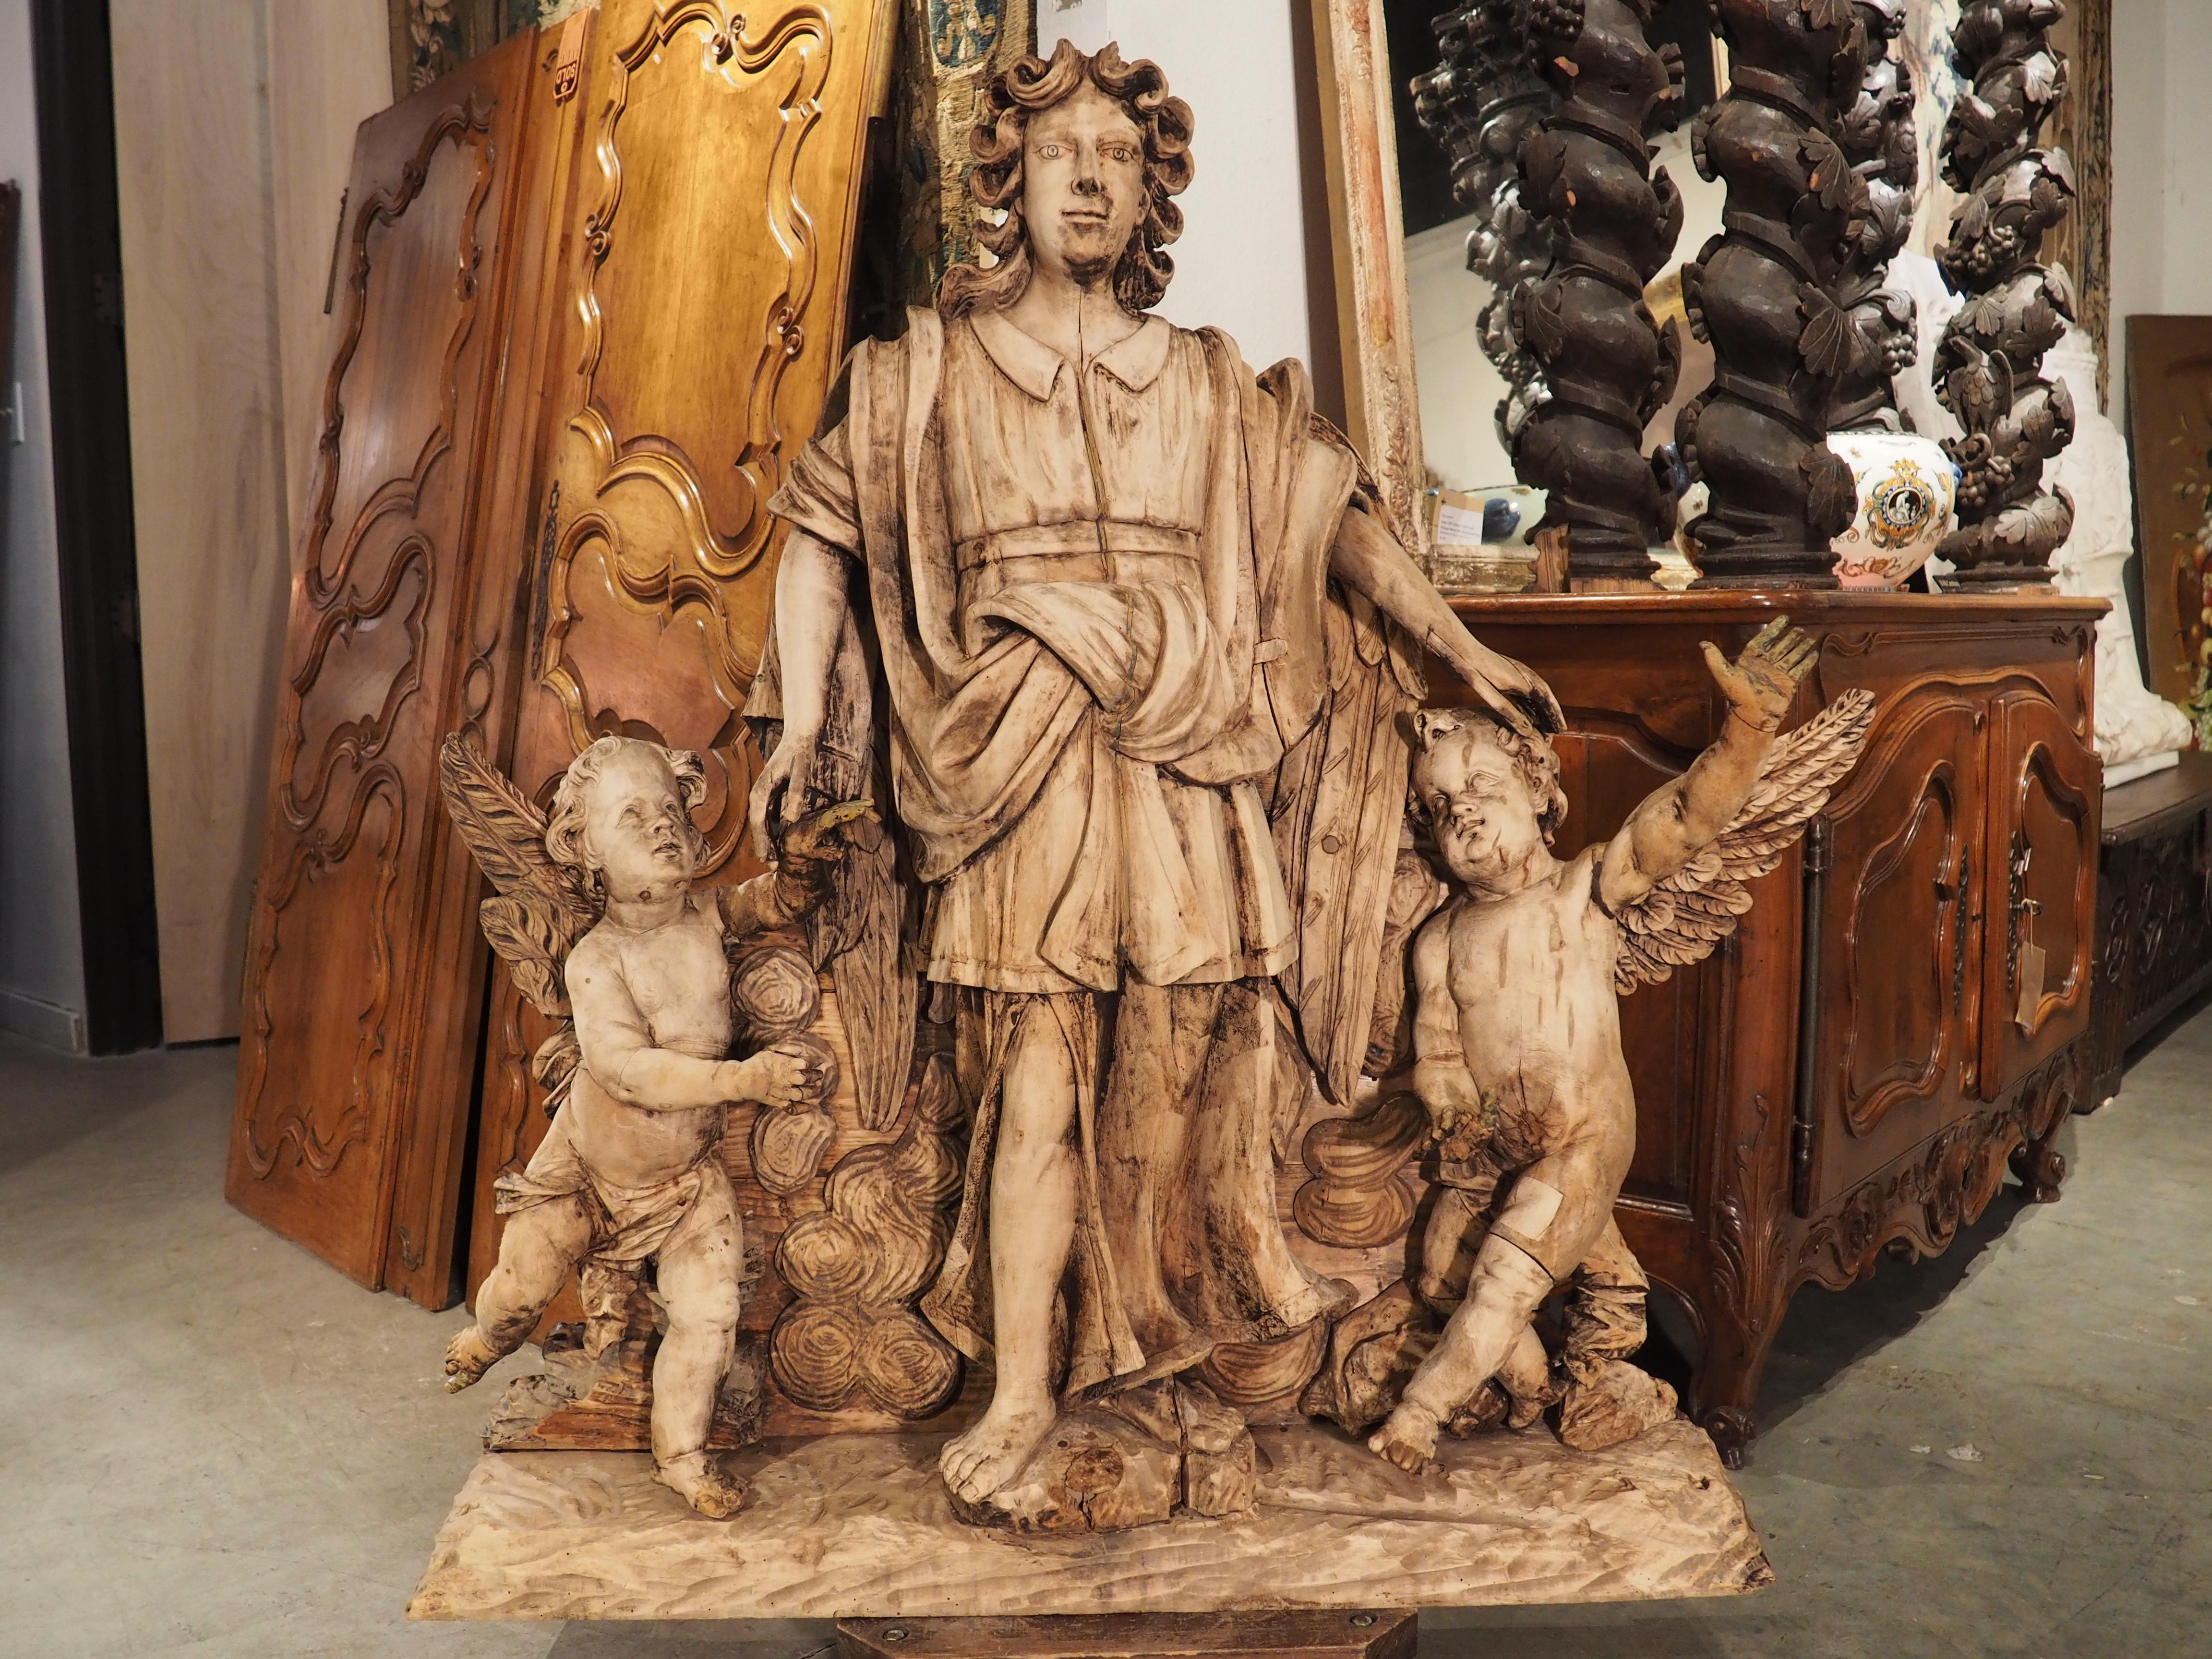 European Large 18th Century Wooden Carving of an Angel with Cherubs For Sale